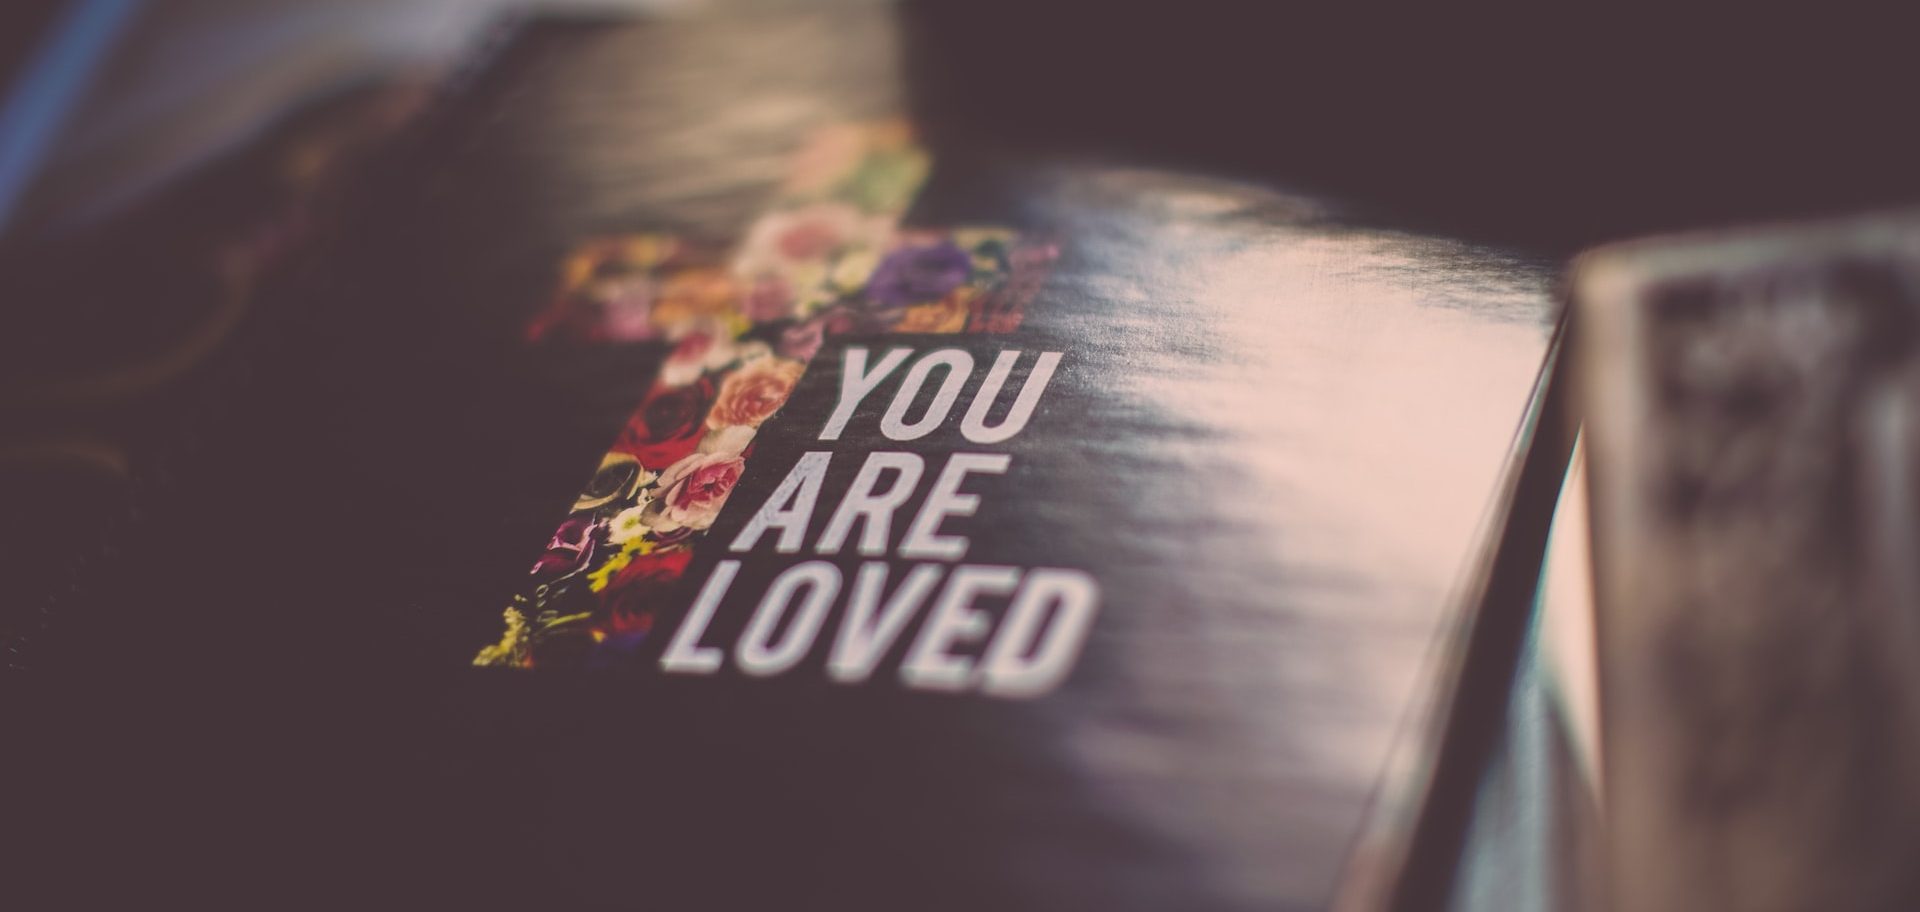 Book with a cross and the words "You are loved" on the cover